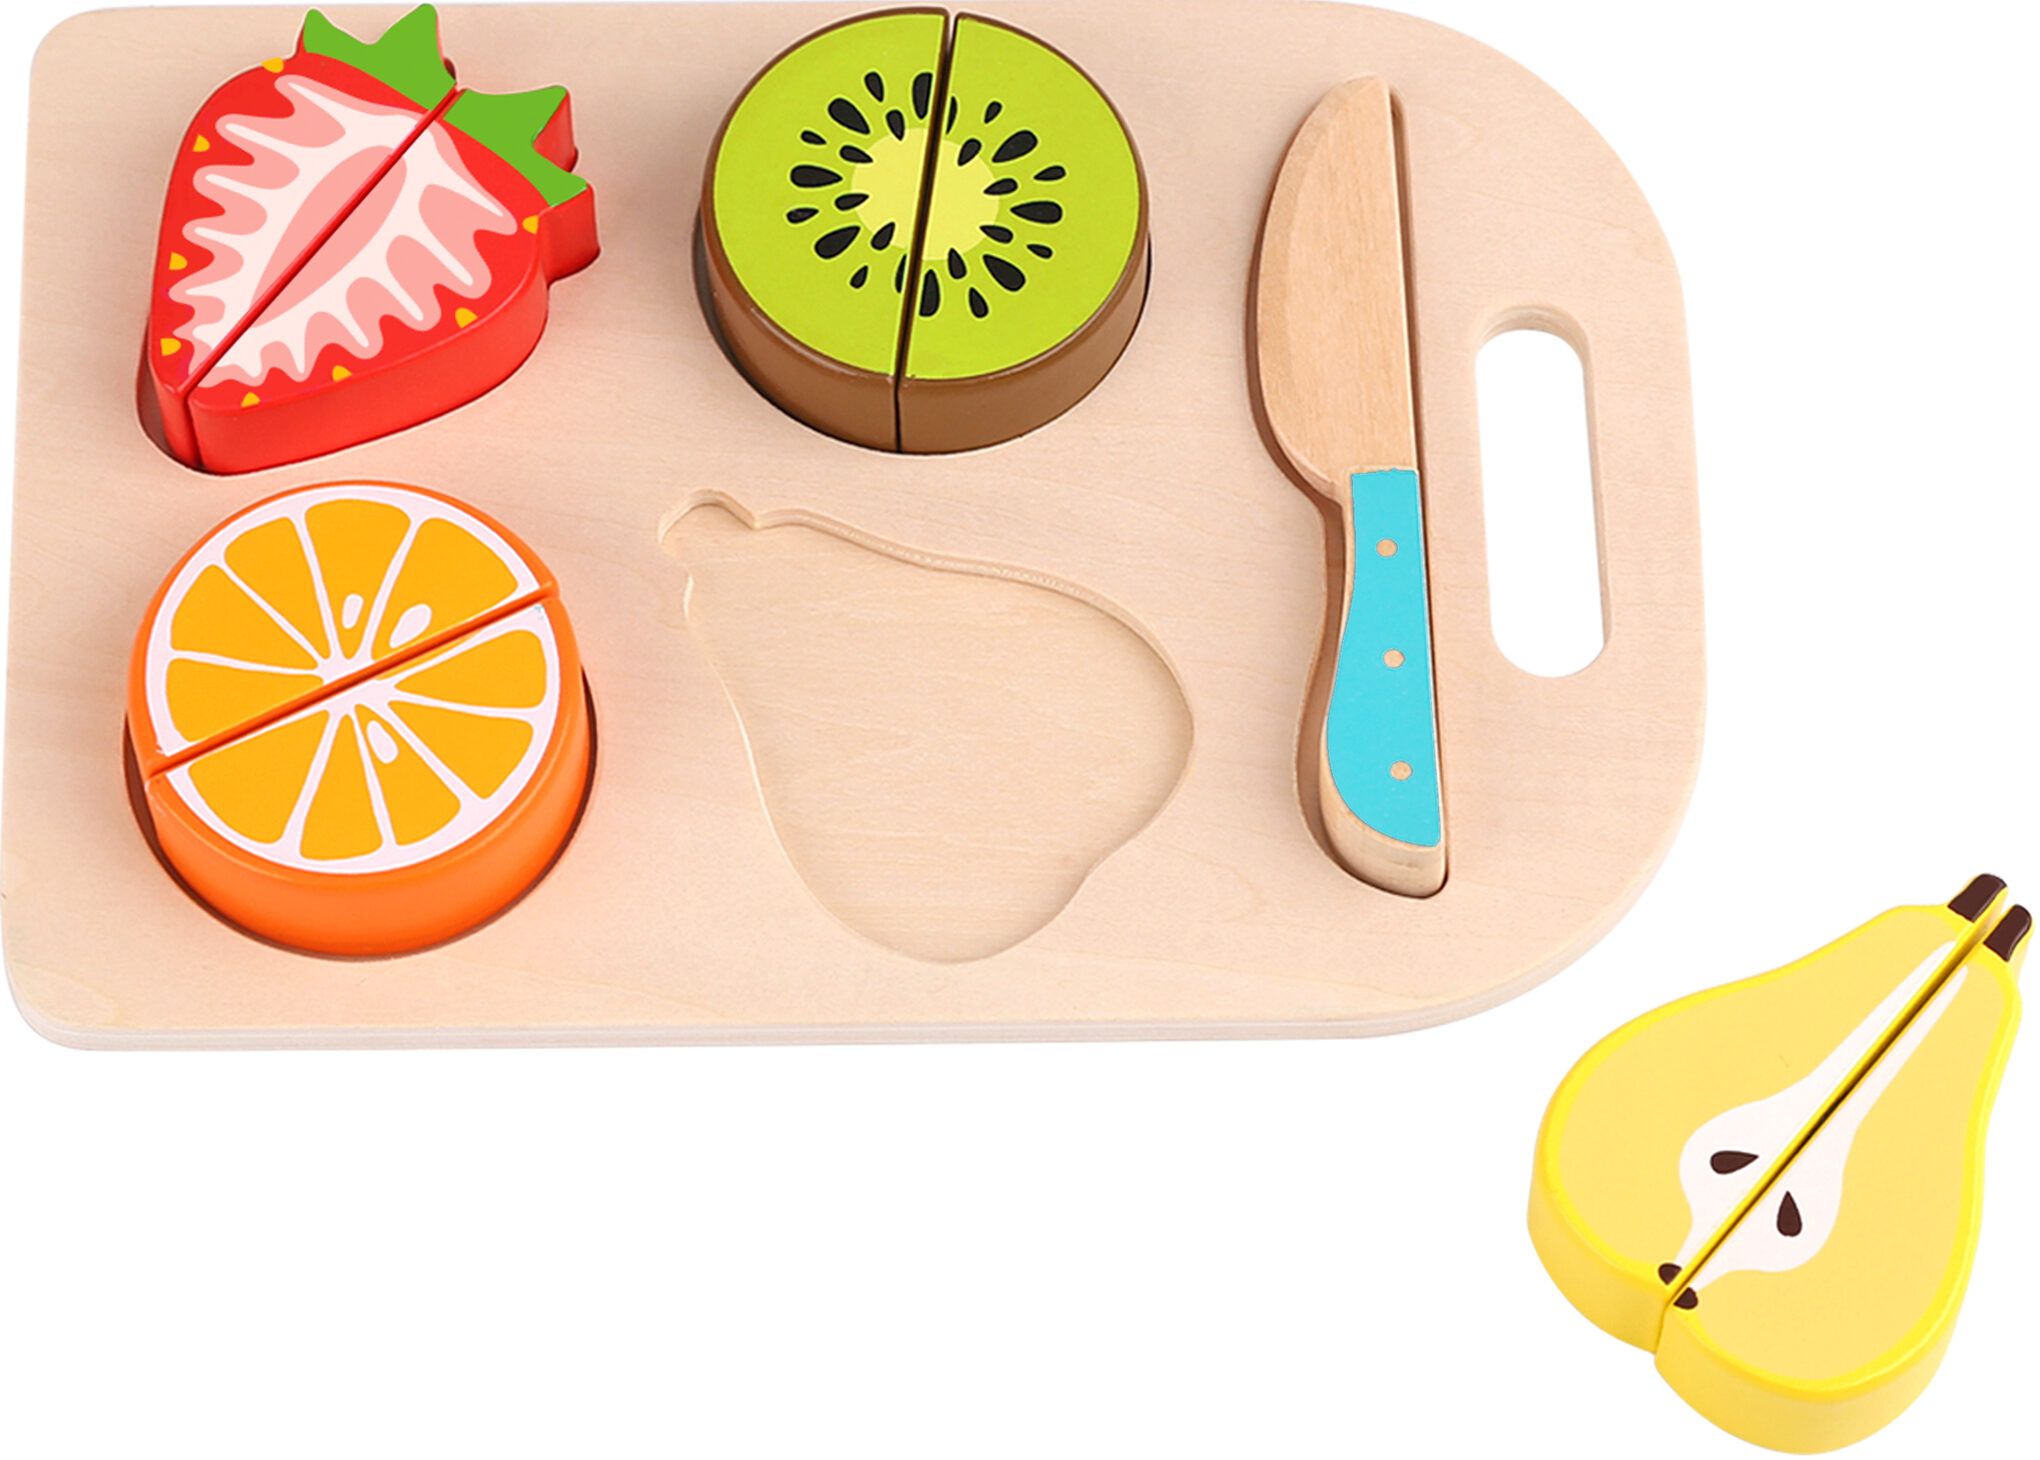 tooky toys - wooden playsets - wooden food toys